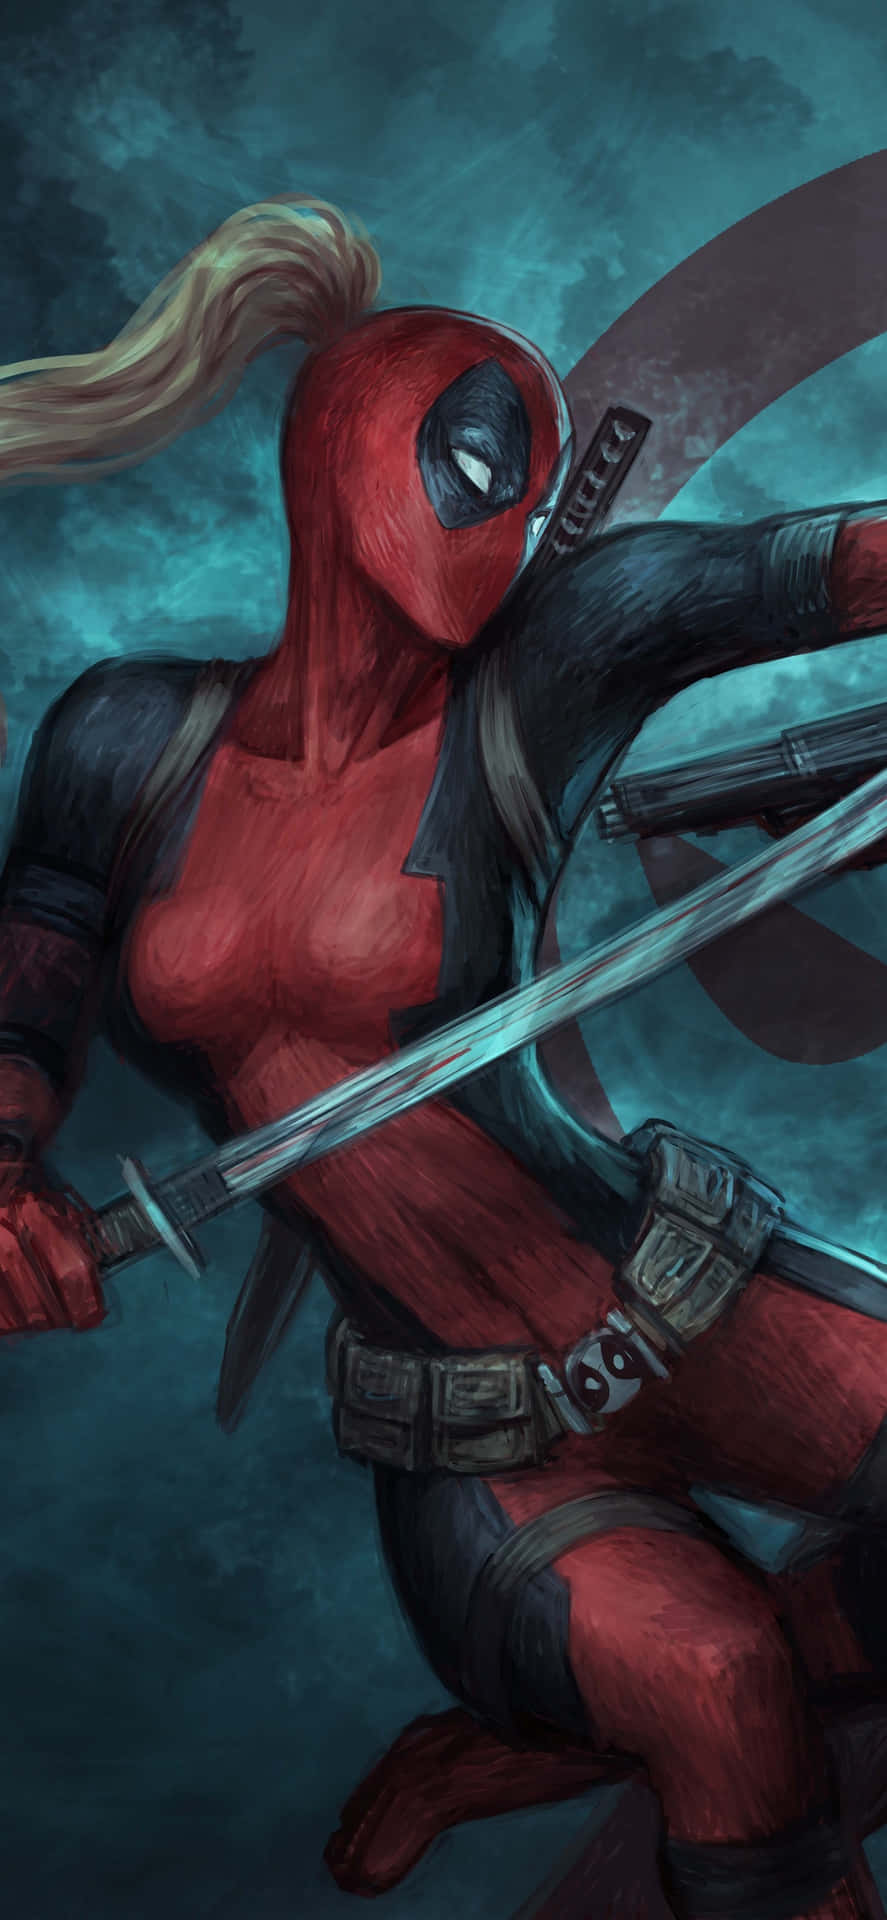 Bring a Superhero to your Phone with the Deadpool Iphone Wallpaper